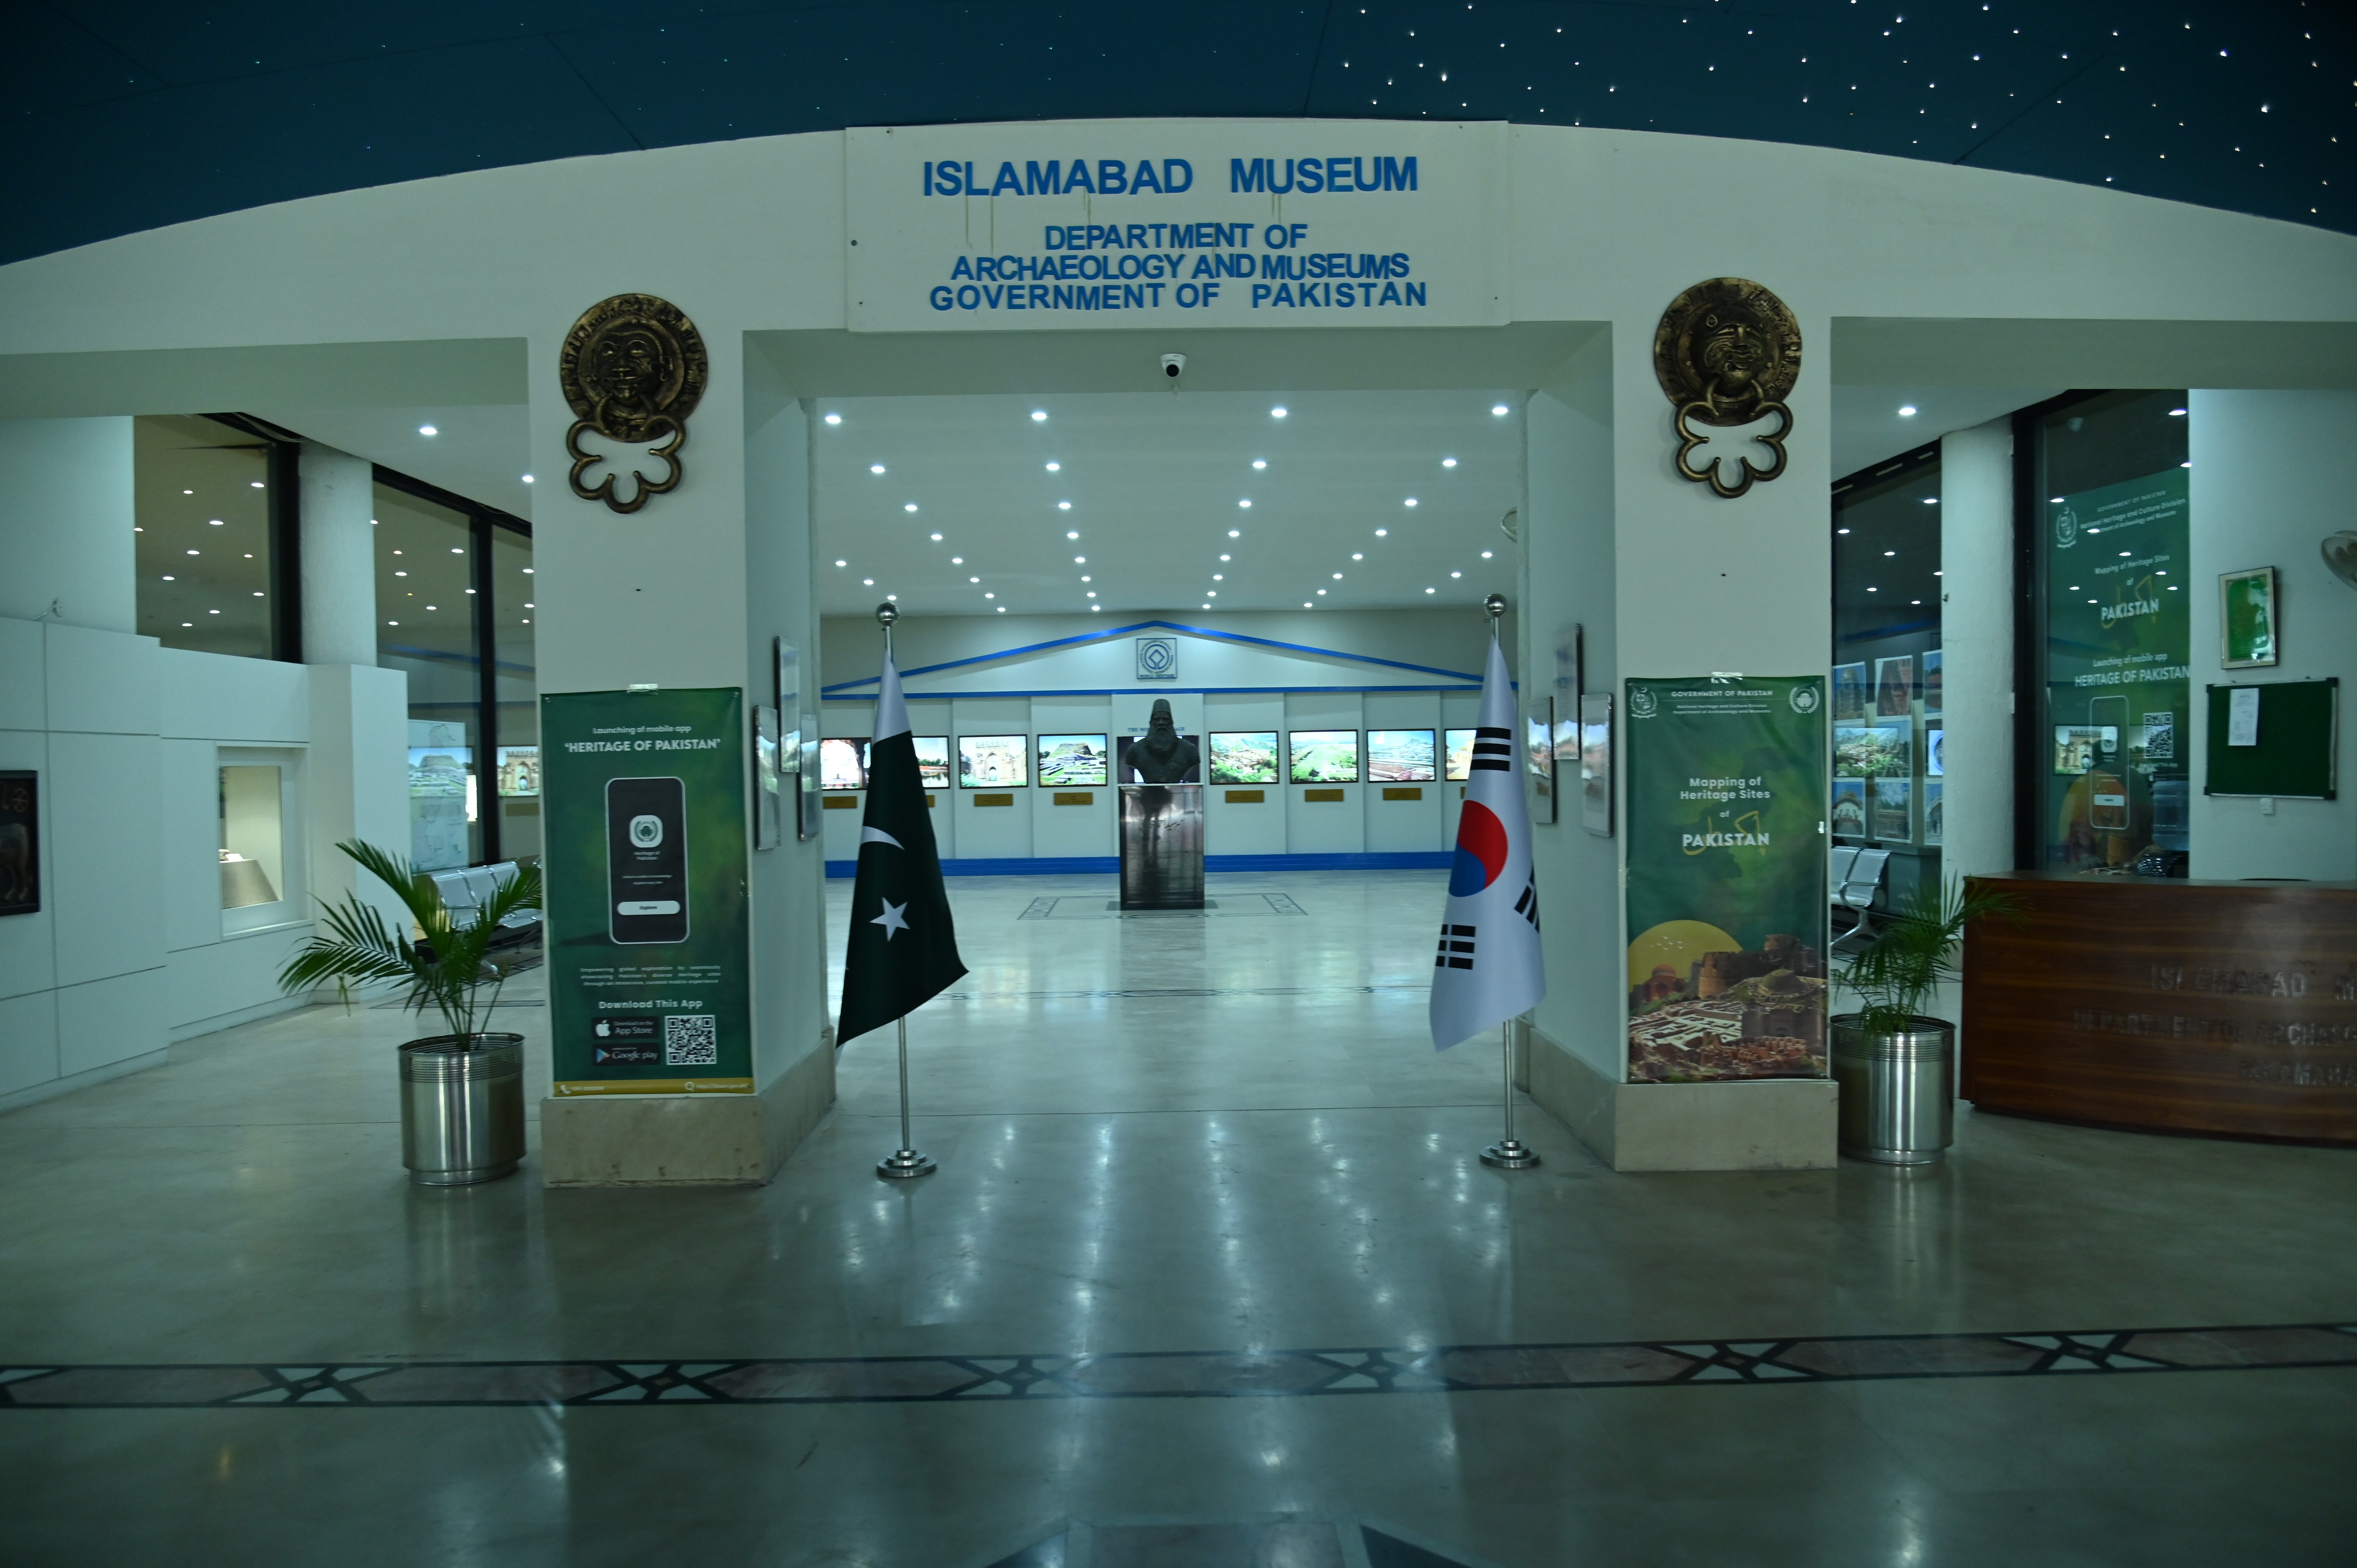 The Main Entrance of Islamabad Museum